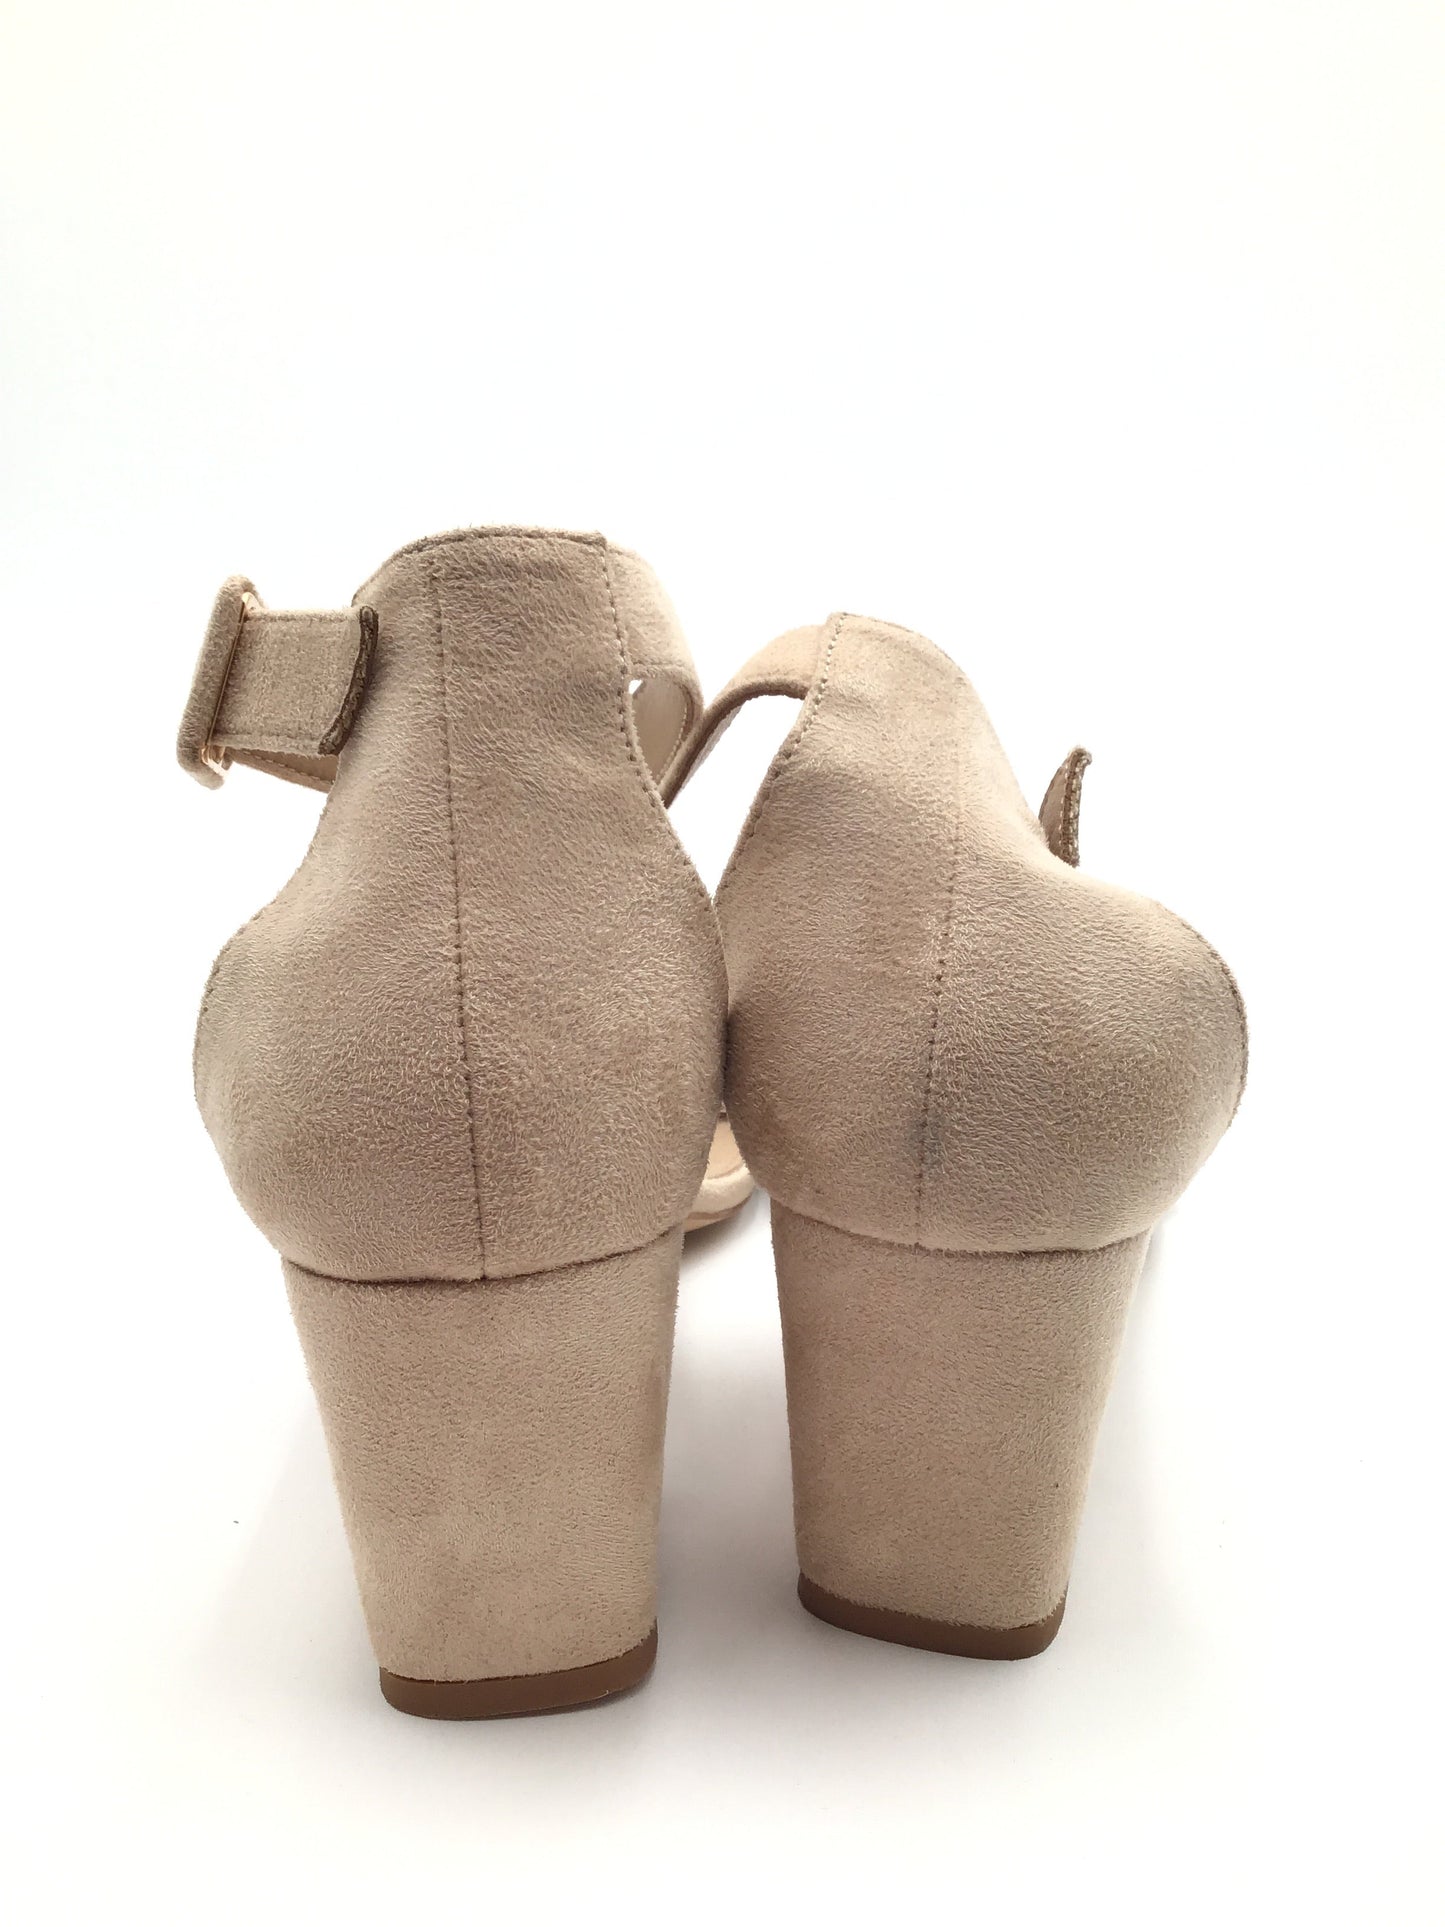 Tan Shoes Heels Block French Connection, Size 10